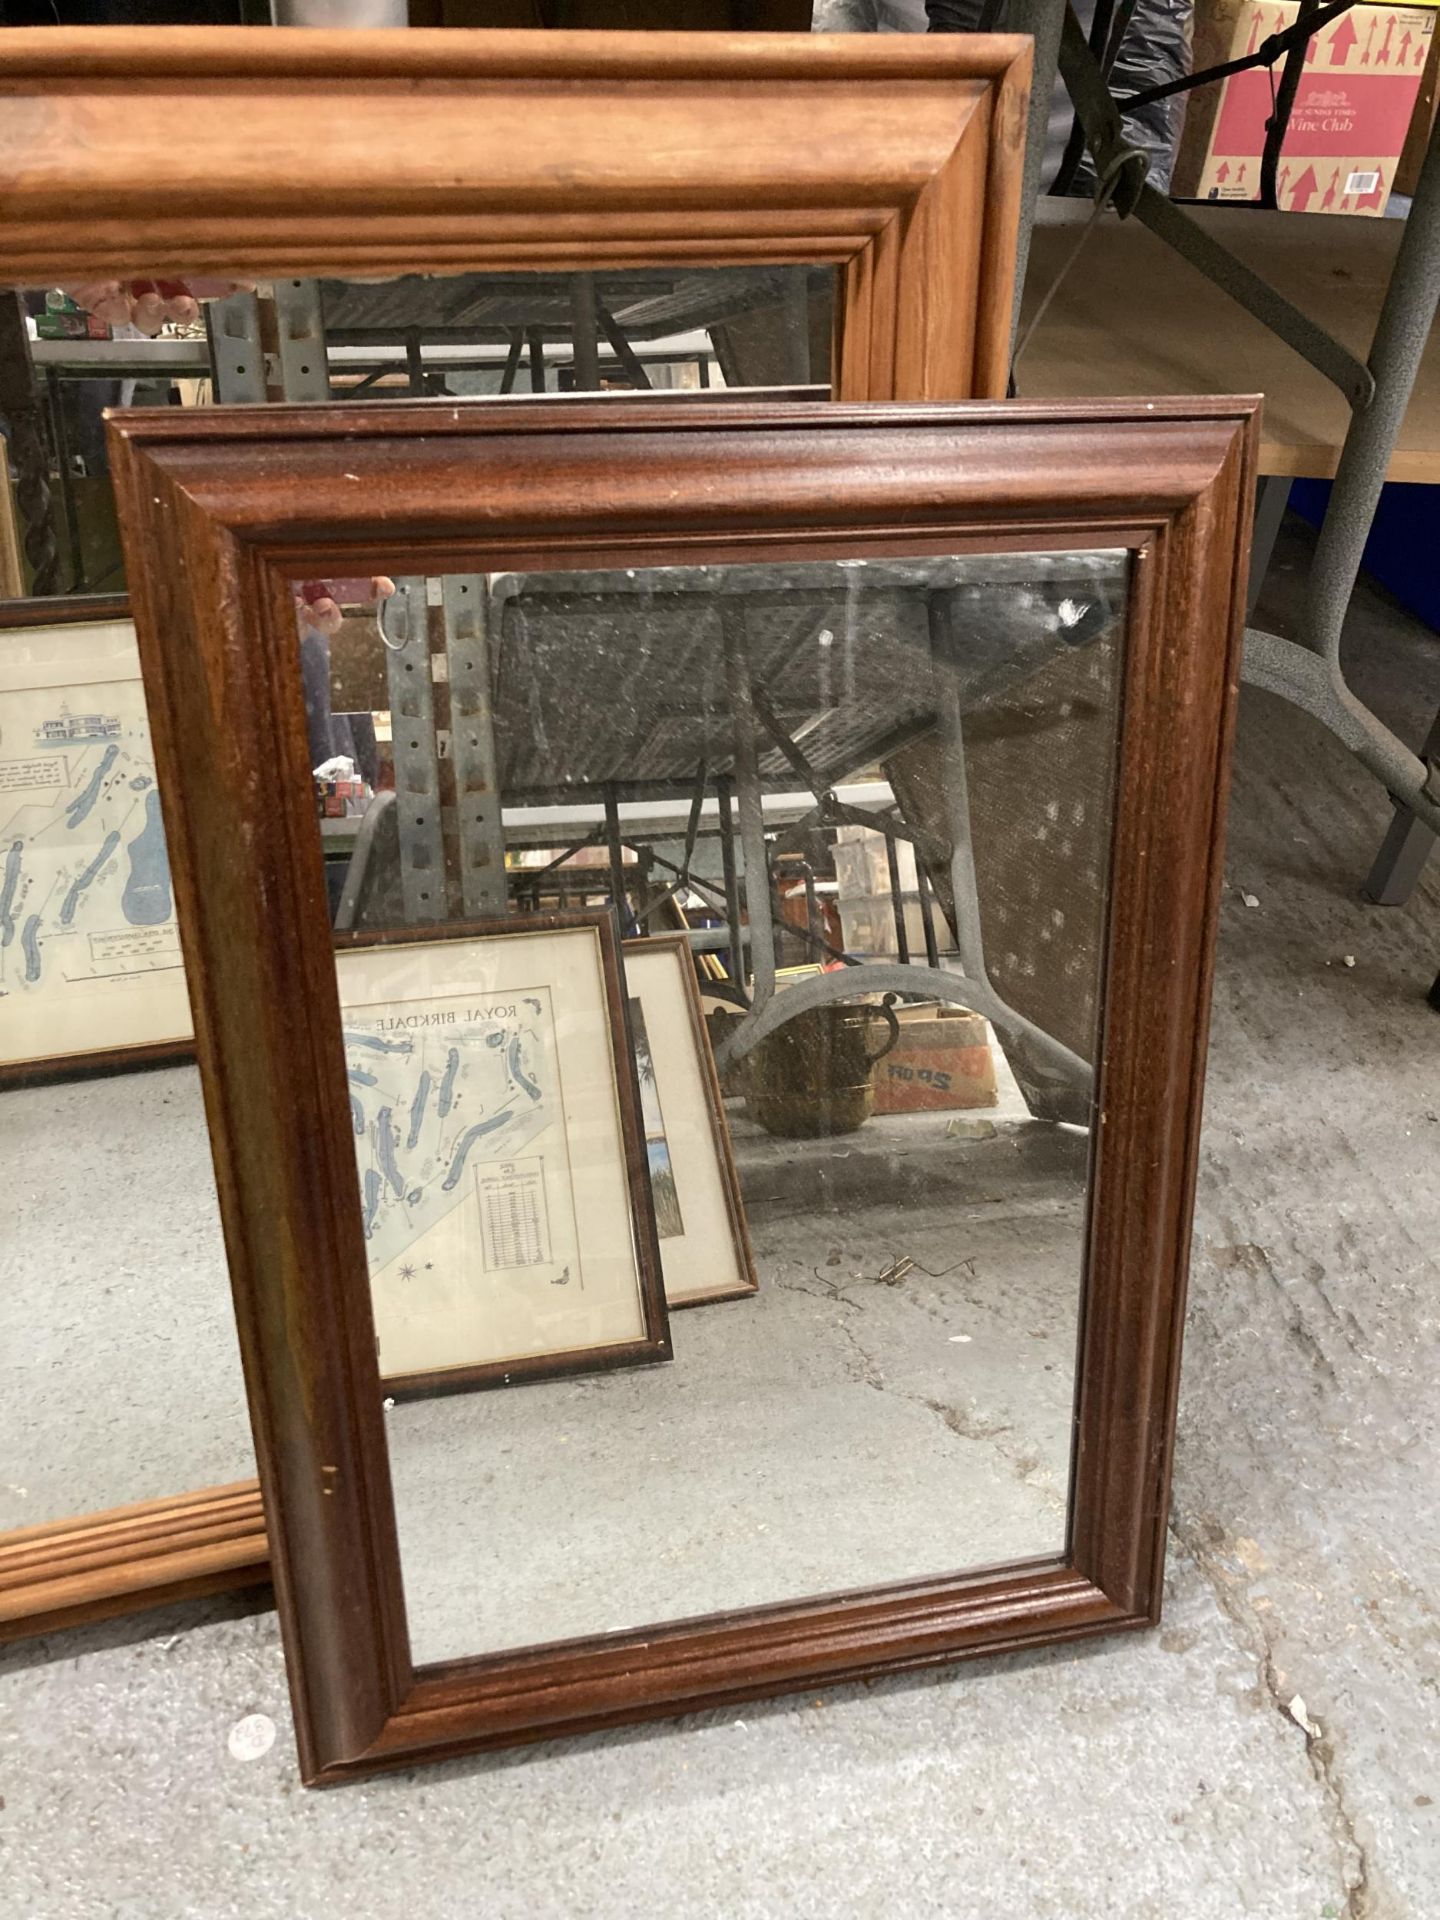 TWO WOODEN FRAMED MIRRORS - Image 2 of 3